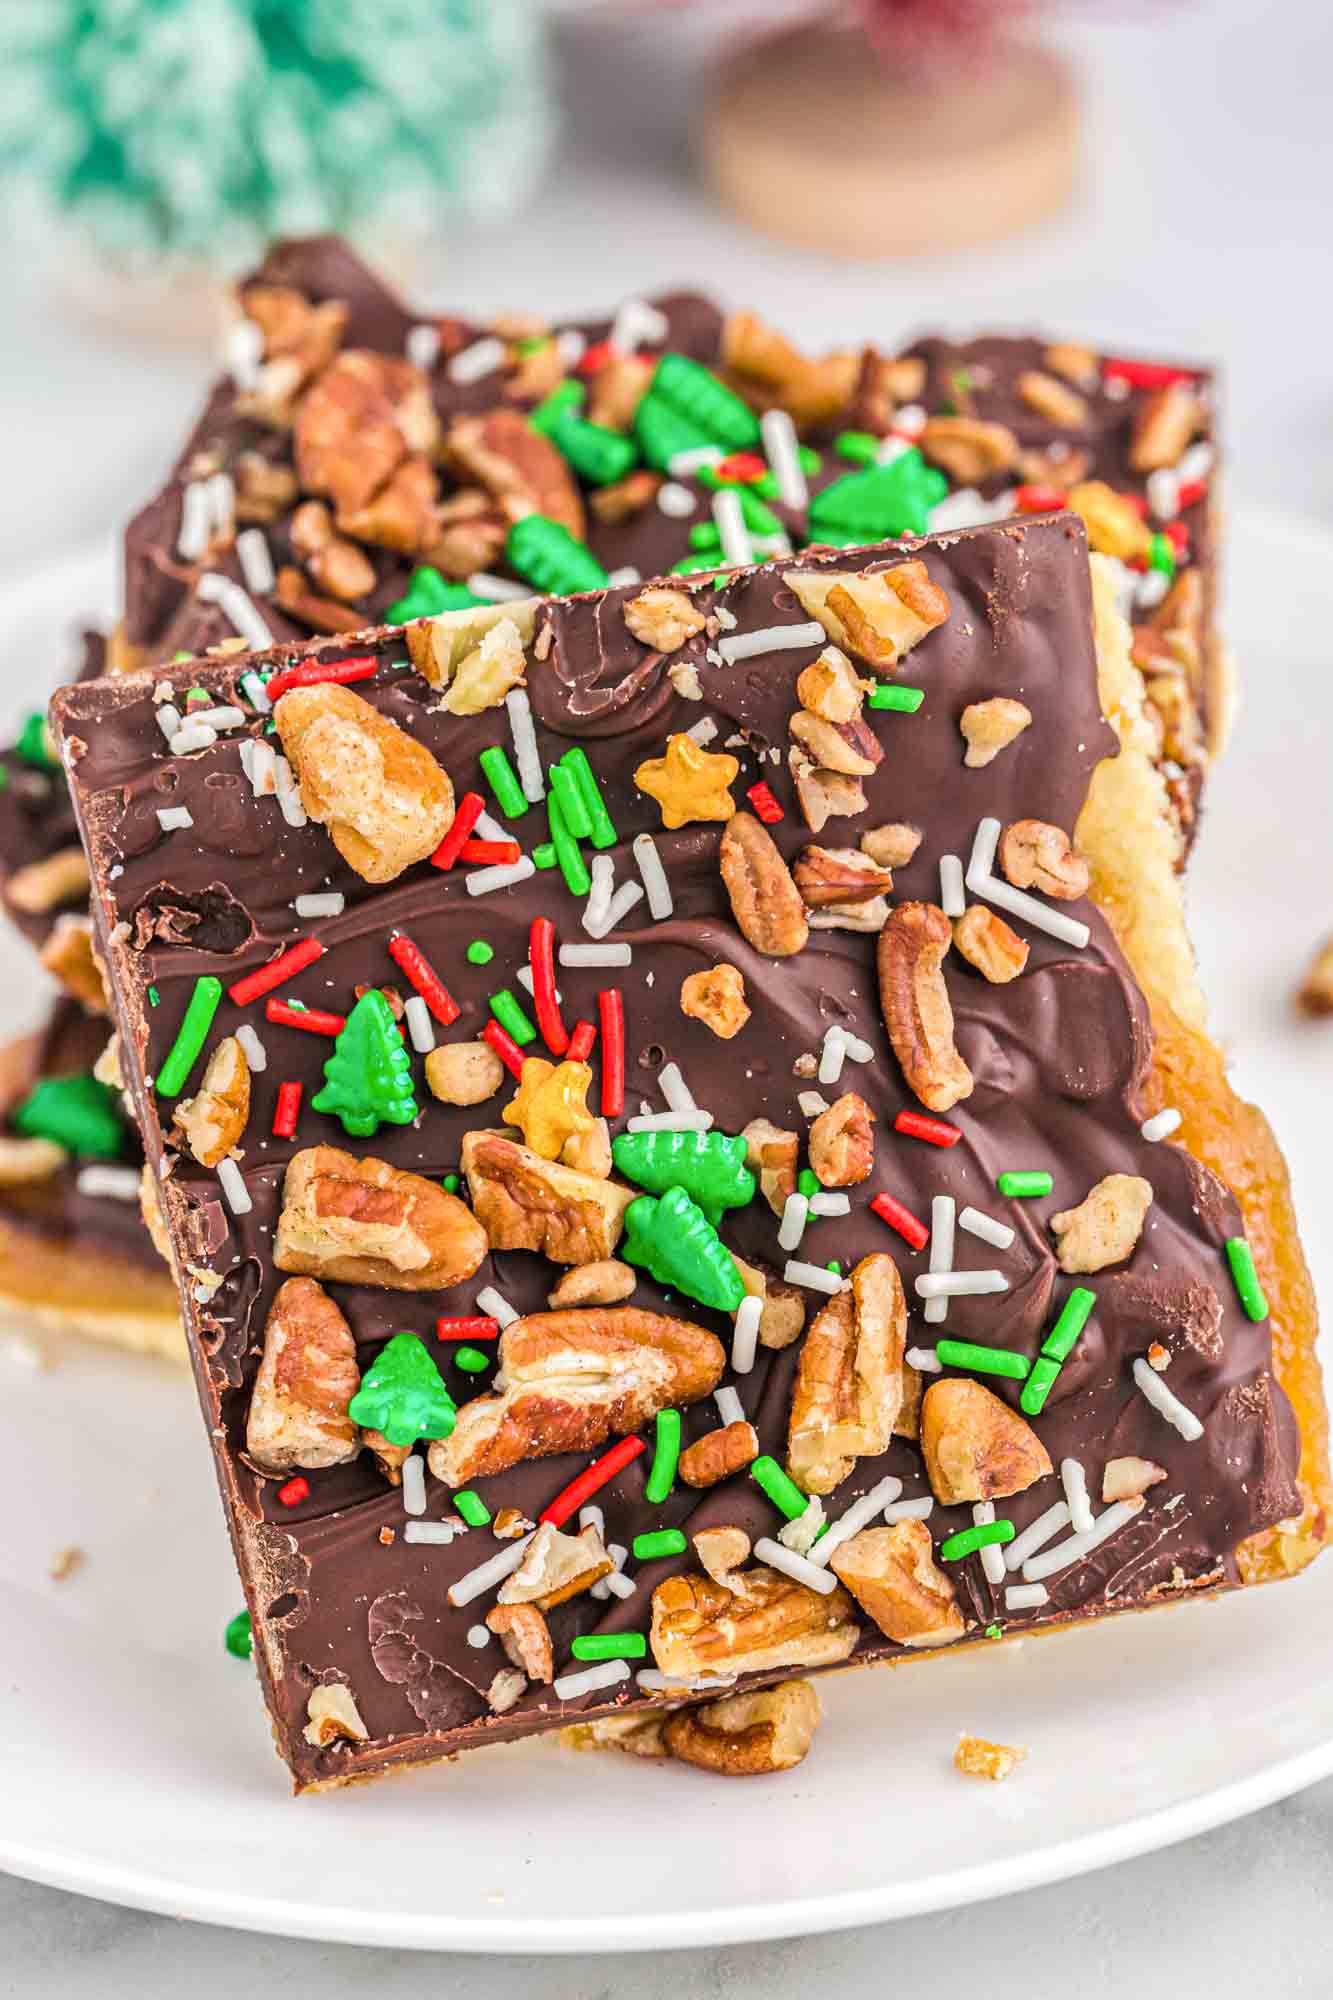 Saltine toffee cracker pieces on a white plate, decorated with holiday sprinkles